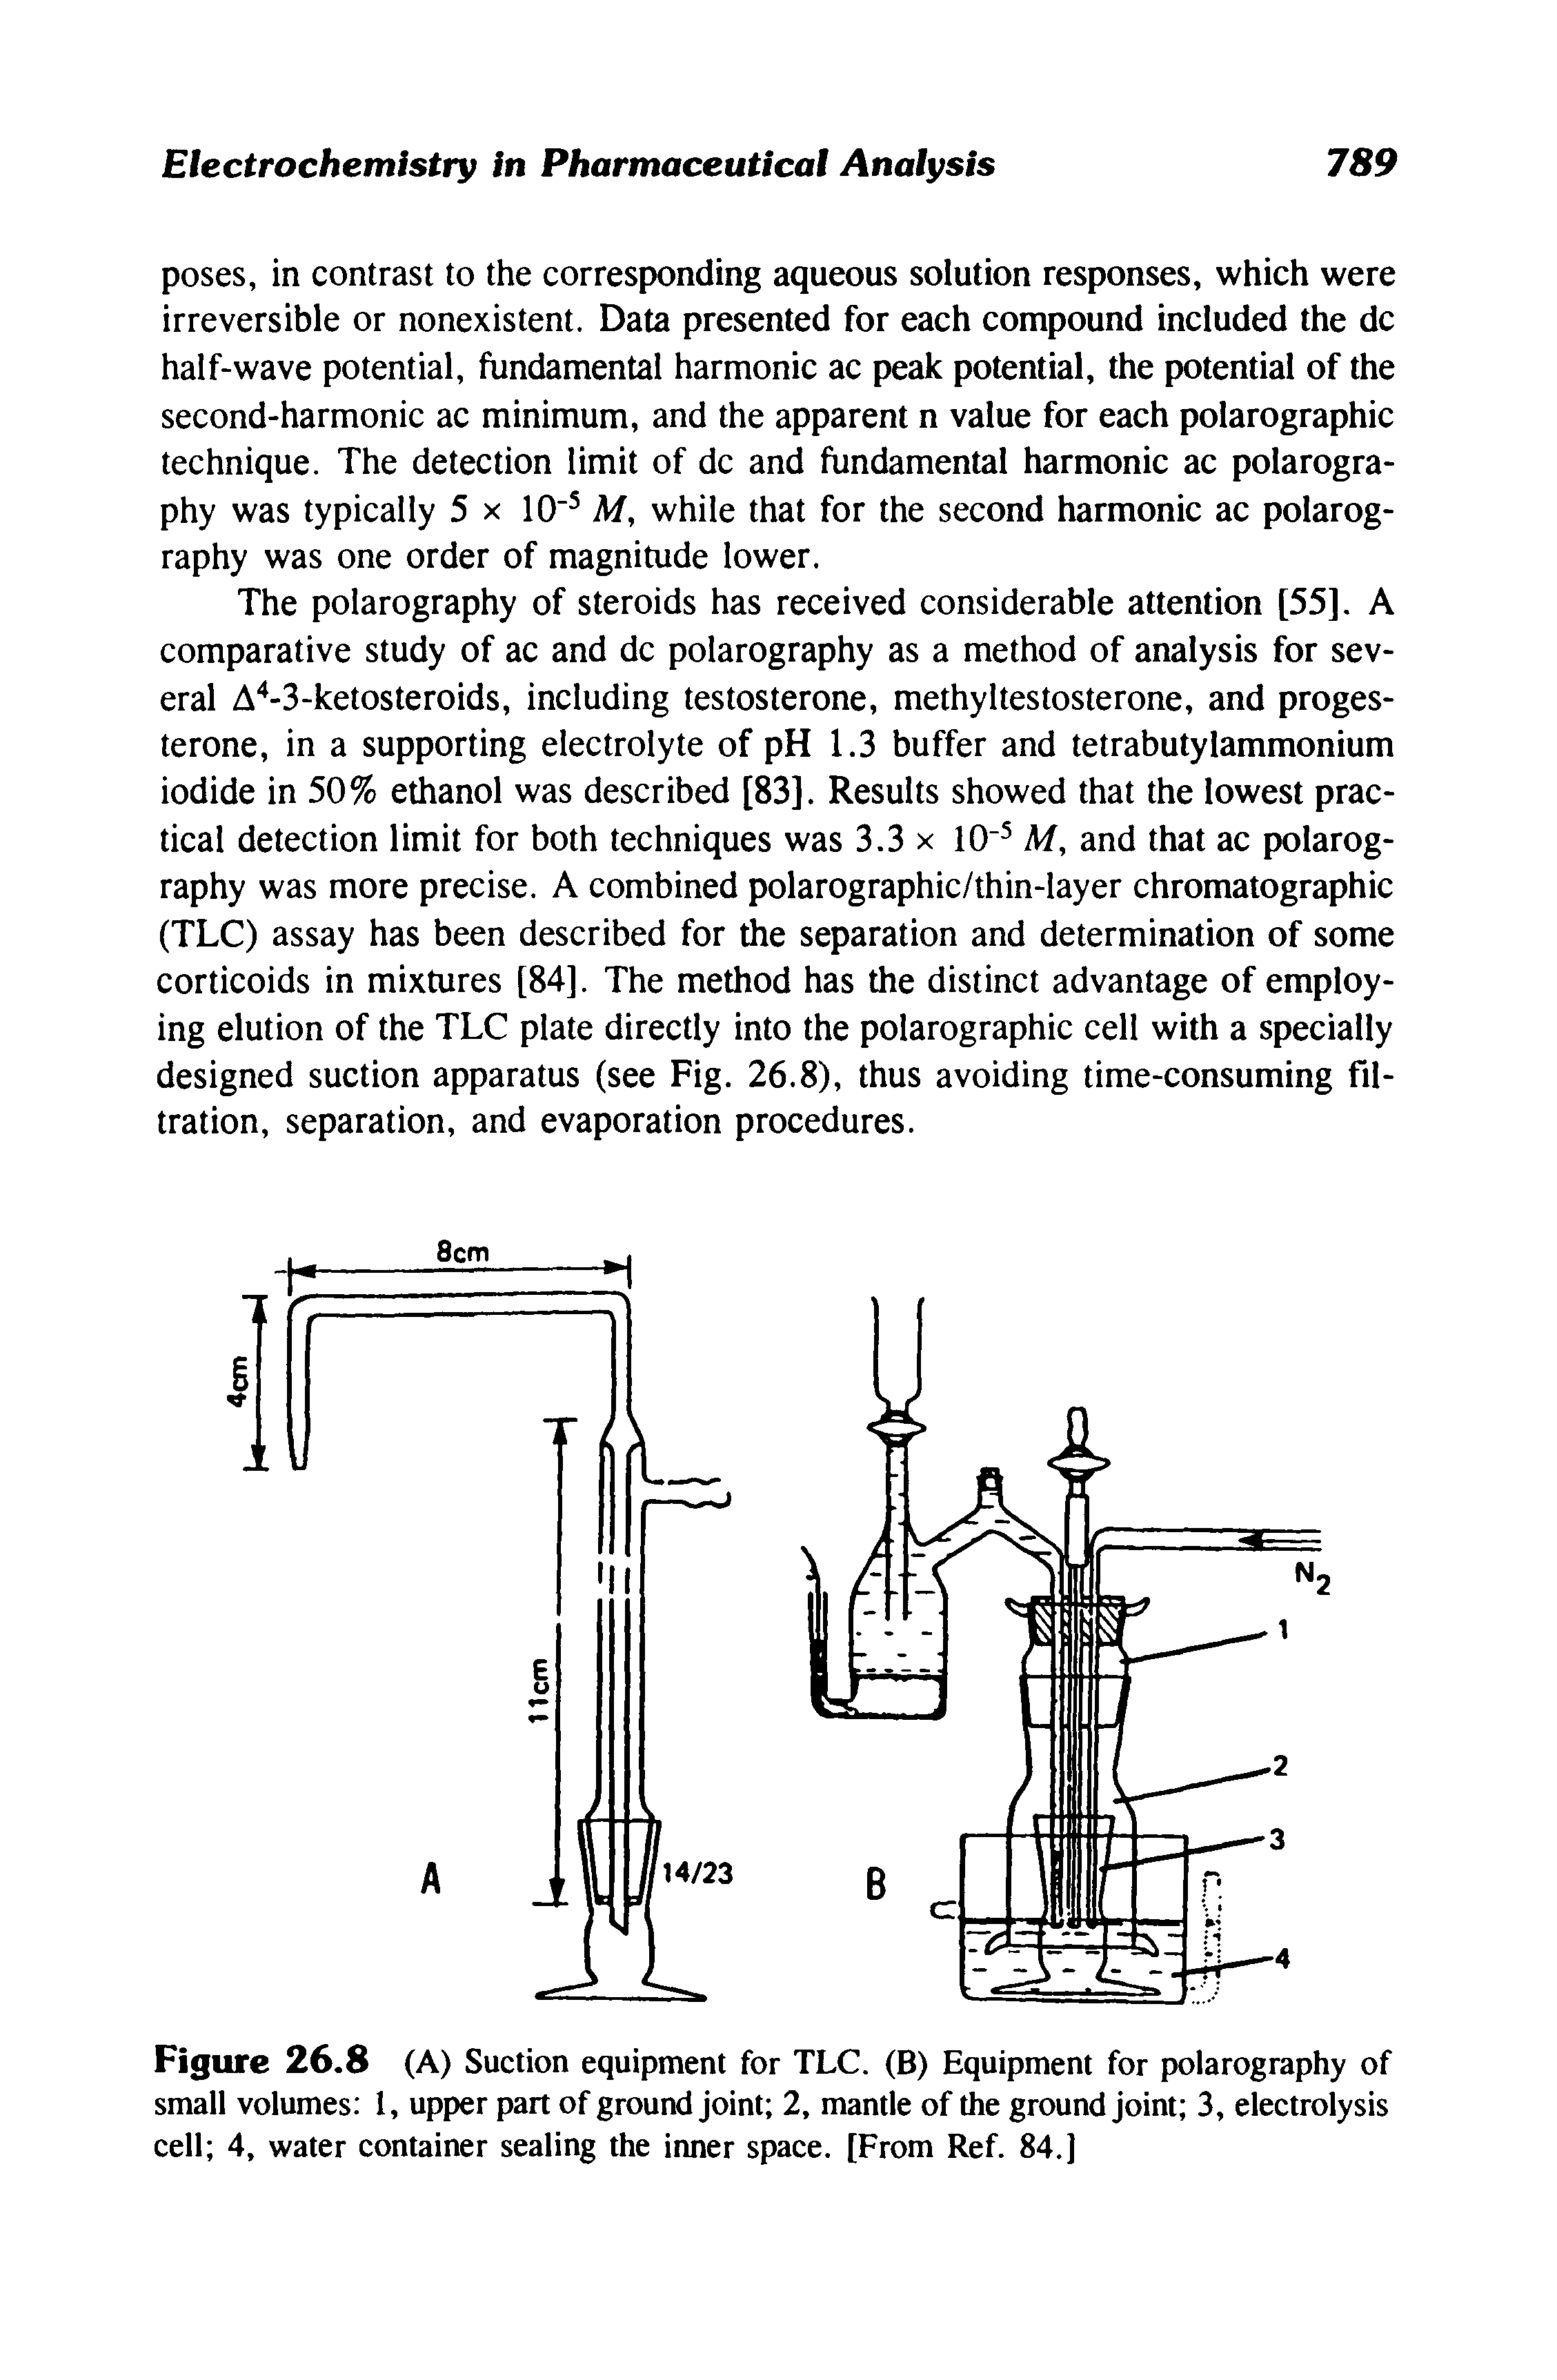 Figure 26.8 (A) Suction equipment for TLC. (B) Equipment for polarography of small volumes 1, upper part of ground joint 2, mantle of the ground joint 3, electrolysis cell 4, water container sealing the inner space. [From Ref. 84.]...